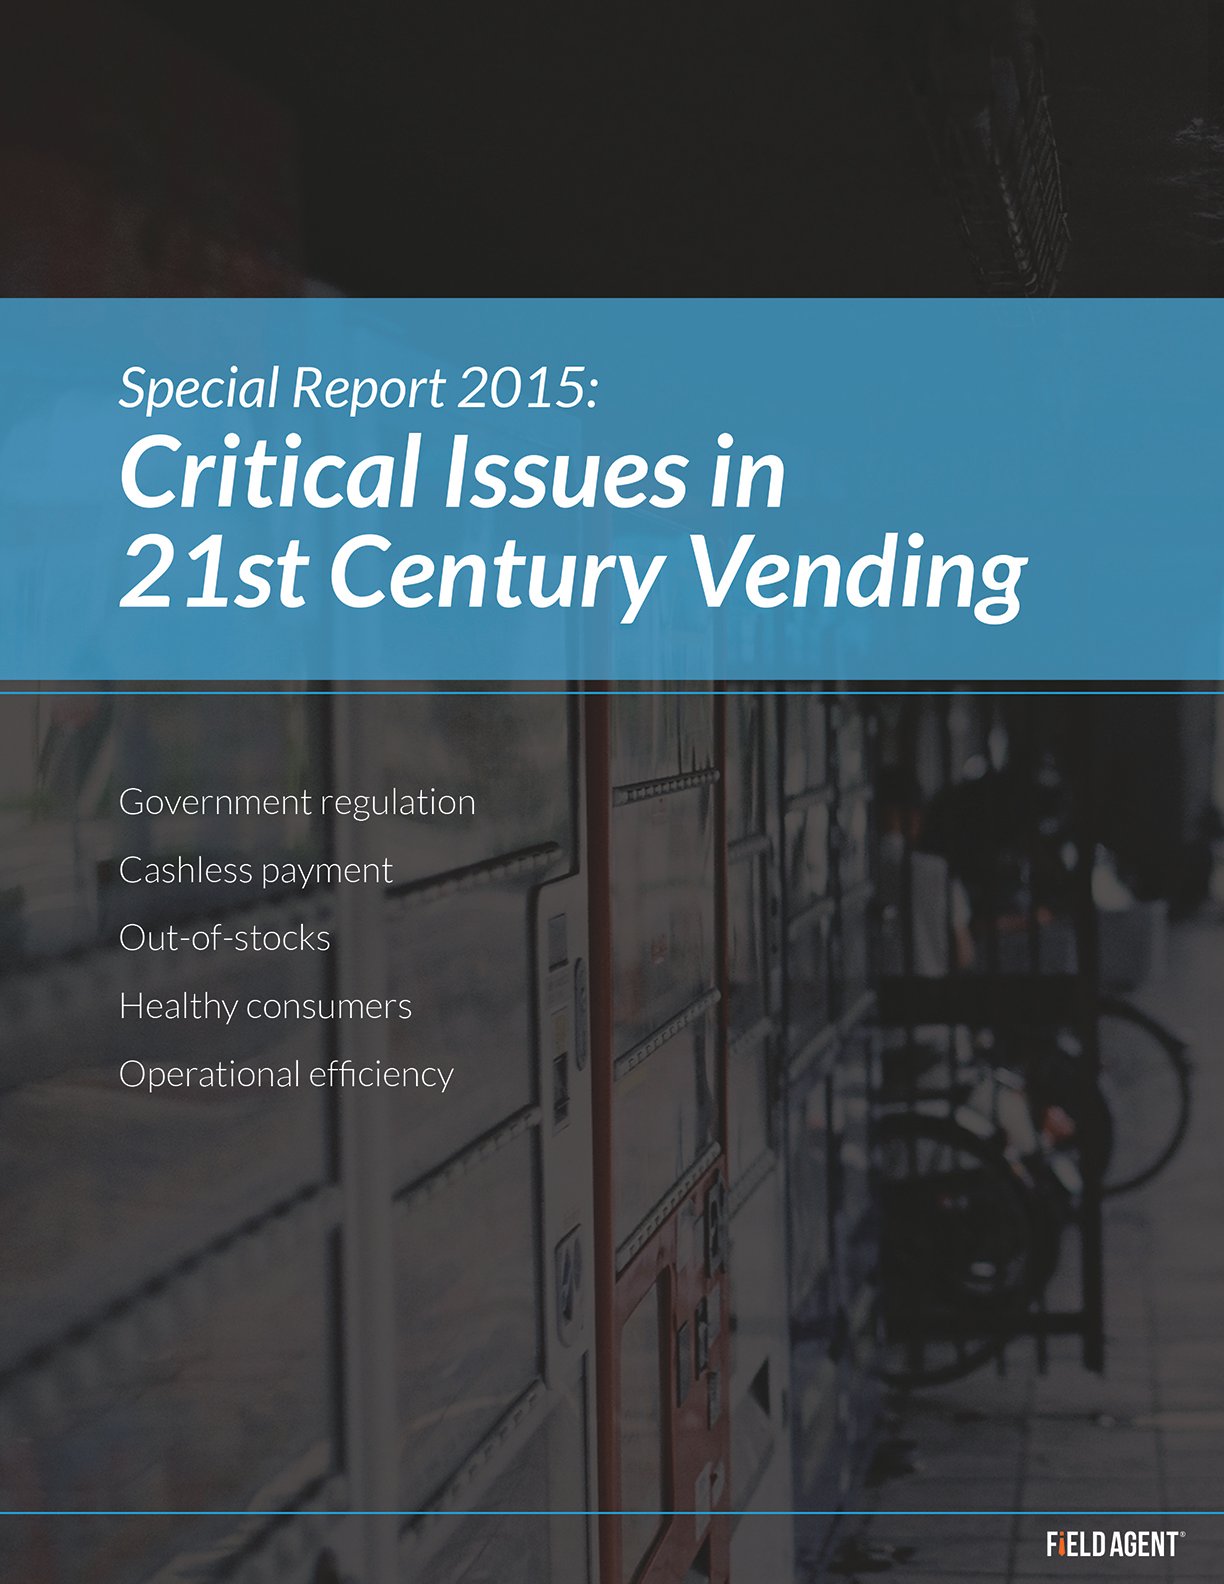 Special Report 2015: Critical Issues in 21st Century Vending